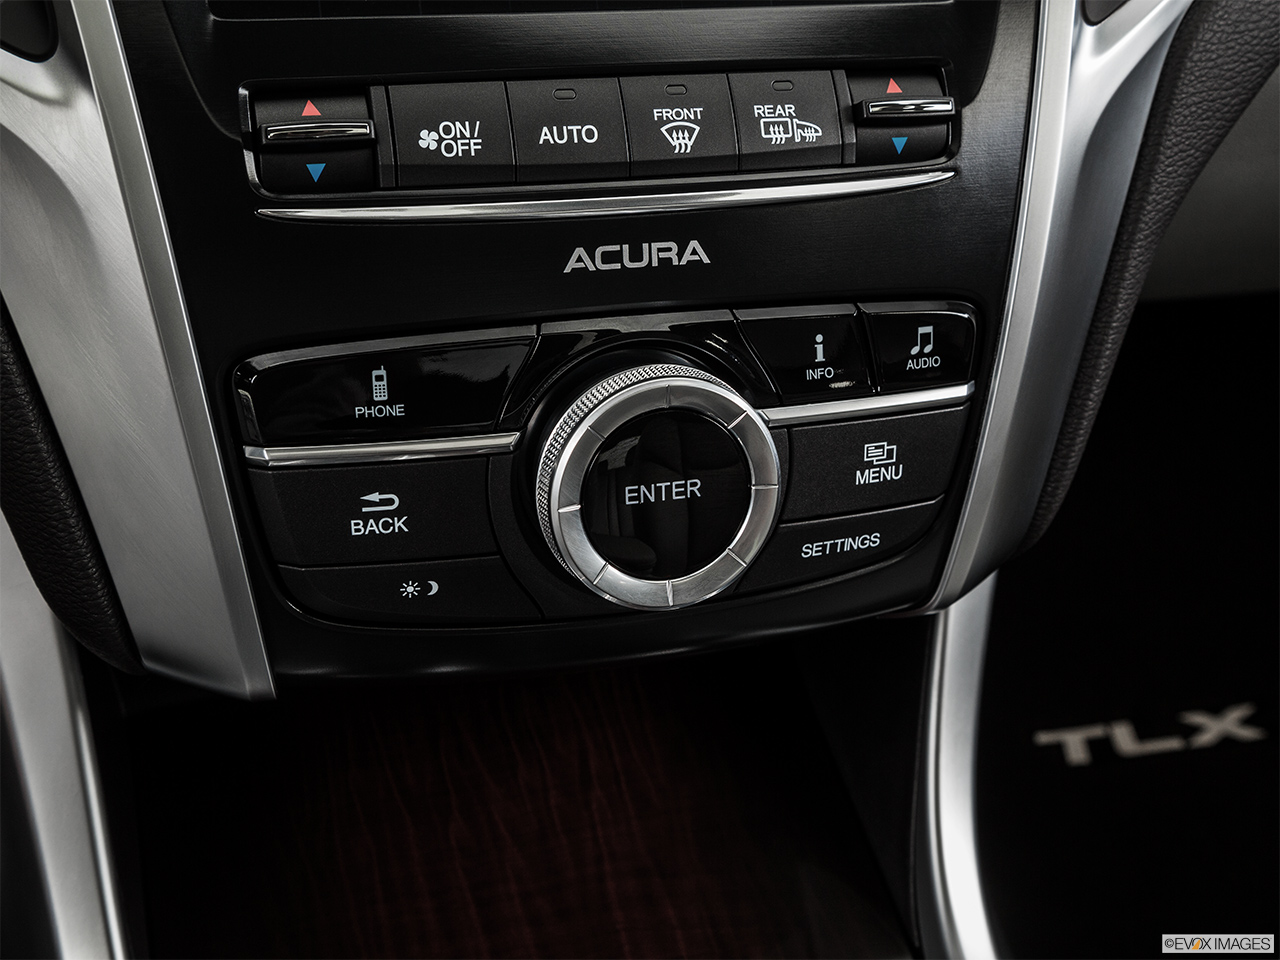 2015 Acura TLX 3.5 V-6 9-AT P-AWS System Controls. 